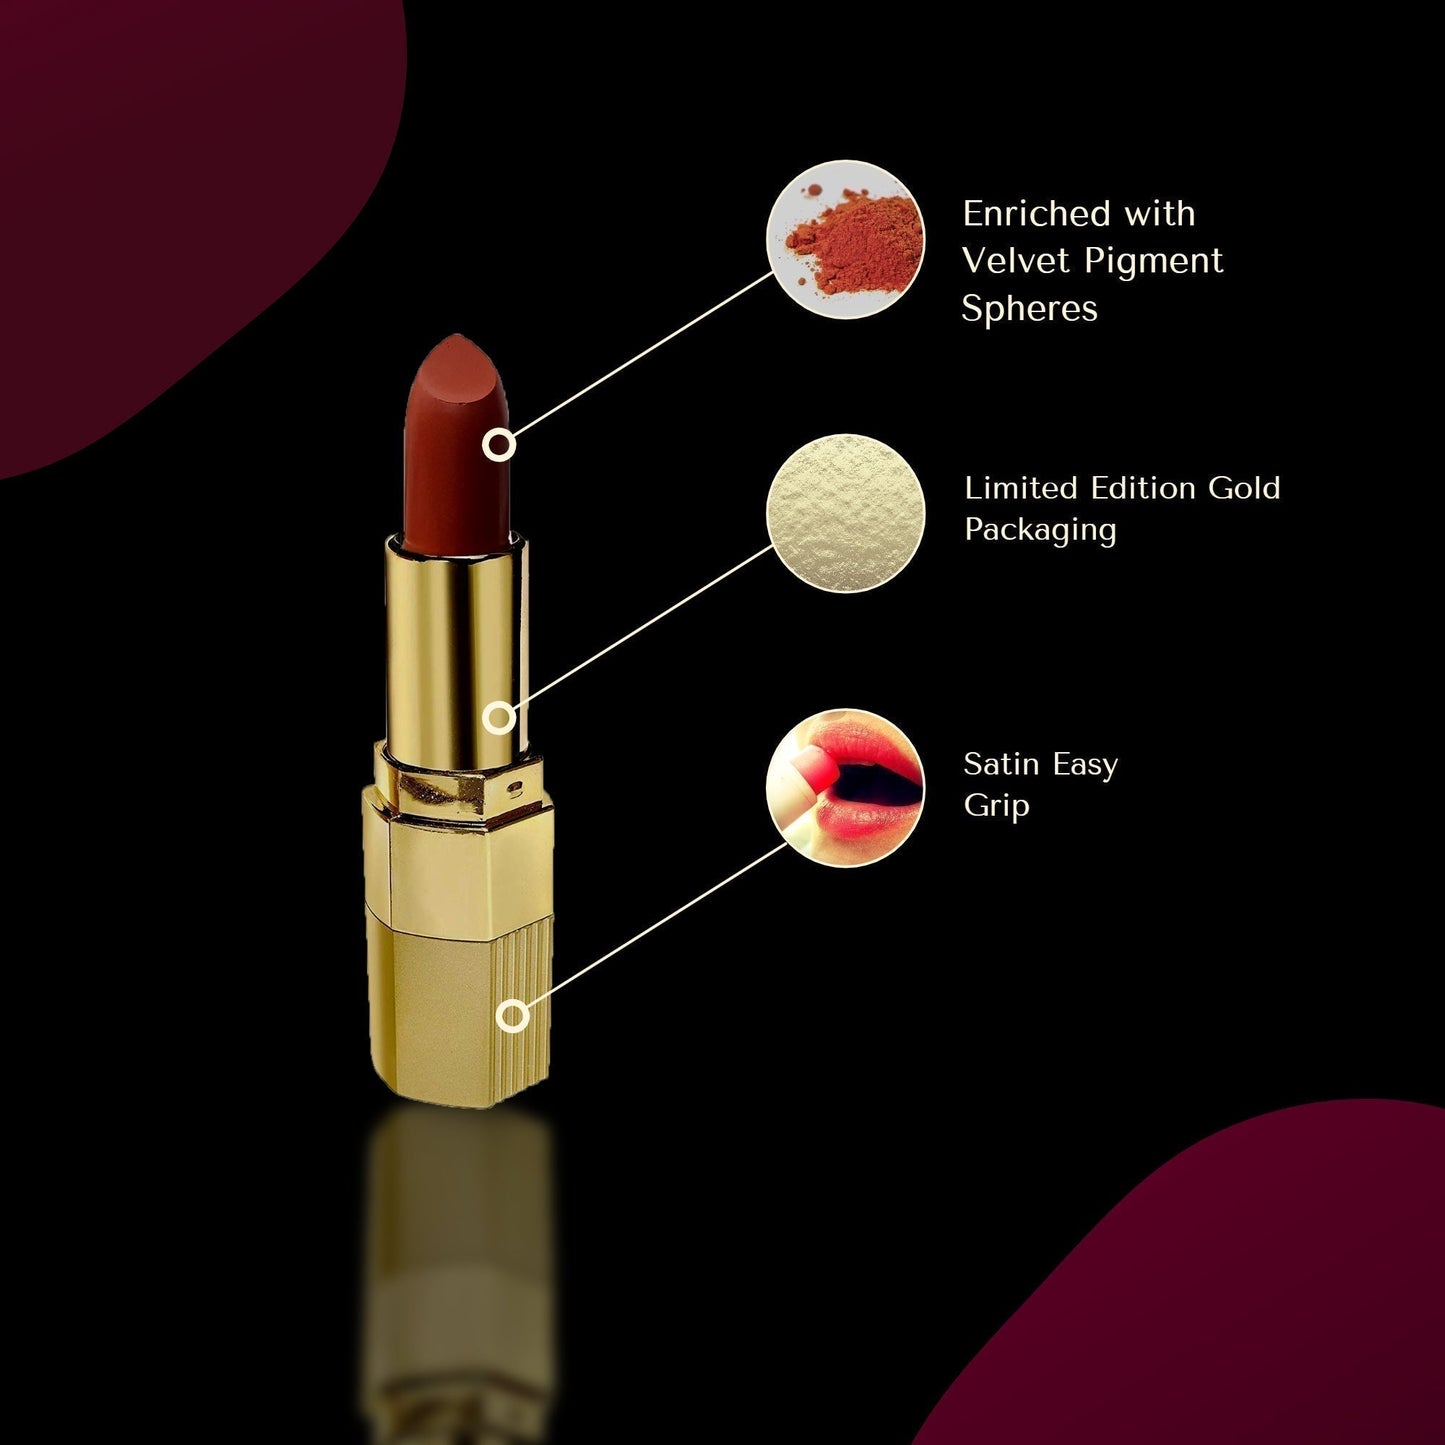 Krayons Desire Lipstick, Highly Pigmented, Longlasting, 3.5g Each, Combo, Pack of 2 (Magic Pink, Nude Caramel)